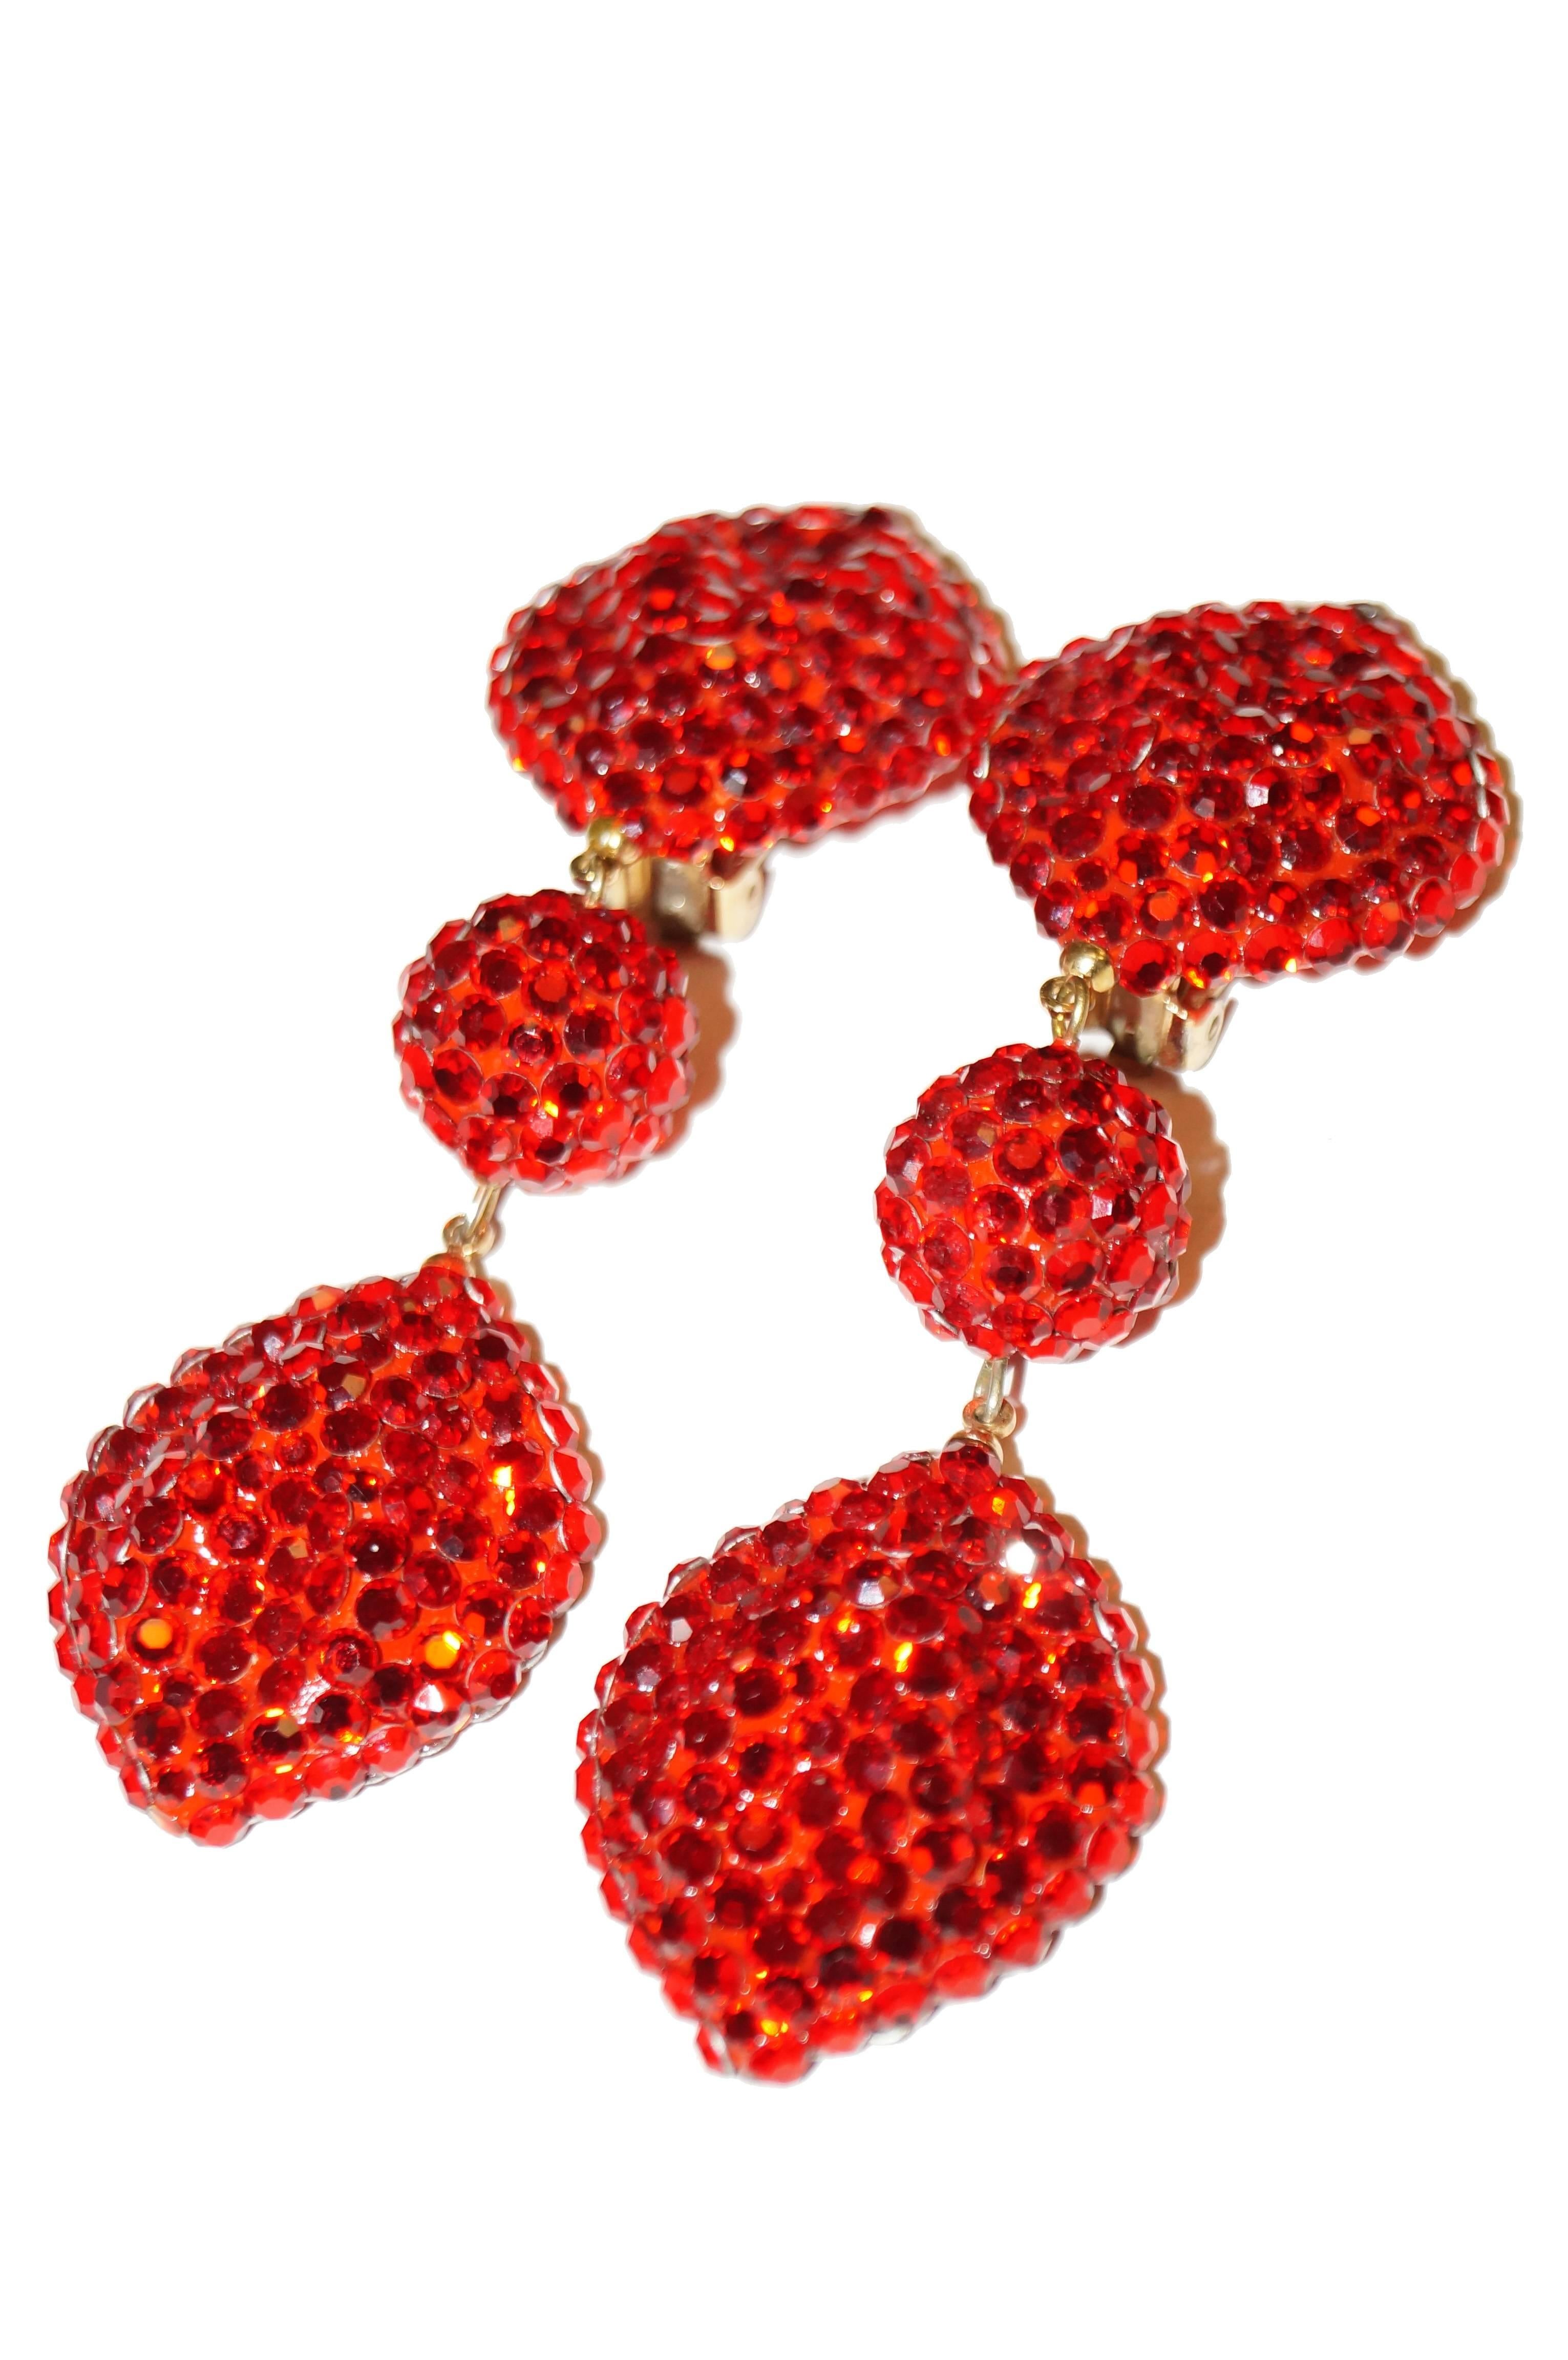 Radiant vintage Richard Kerr earrings. These dangle earrings are composed of three bright red segments covered in rhinestones. The top and bottom segments are oval shaped with pointed tips, the center segment is a sphere. Center and bottom segments